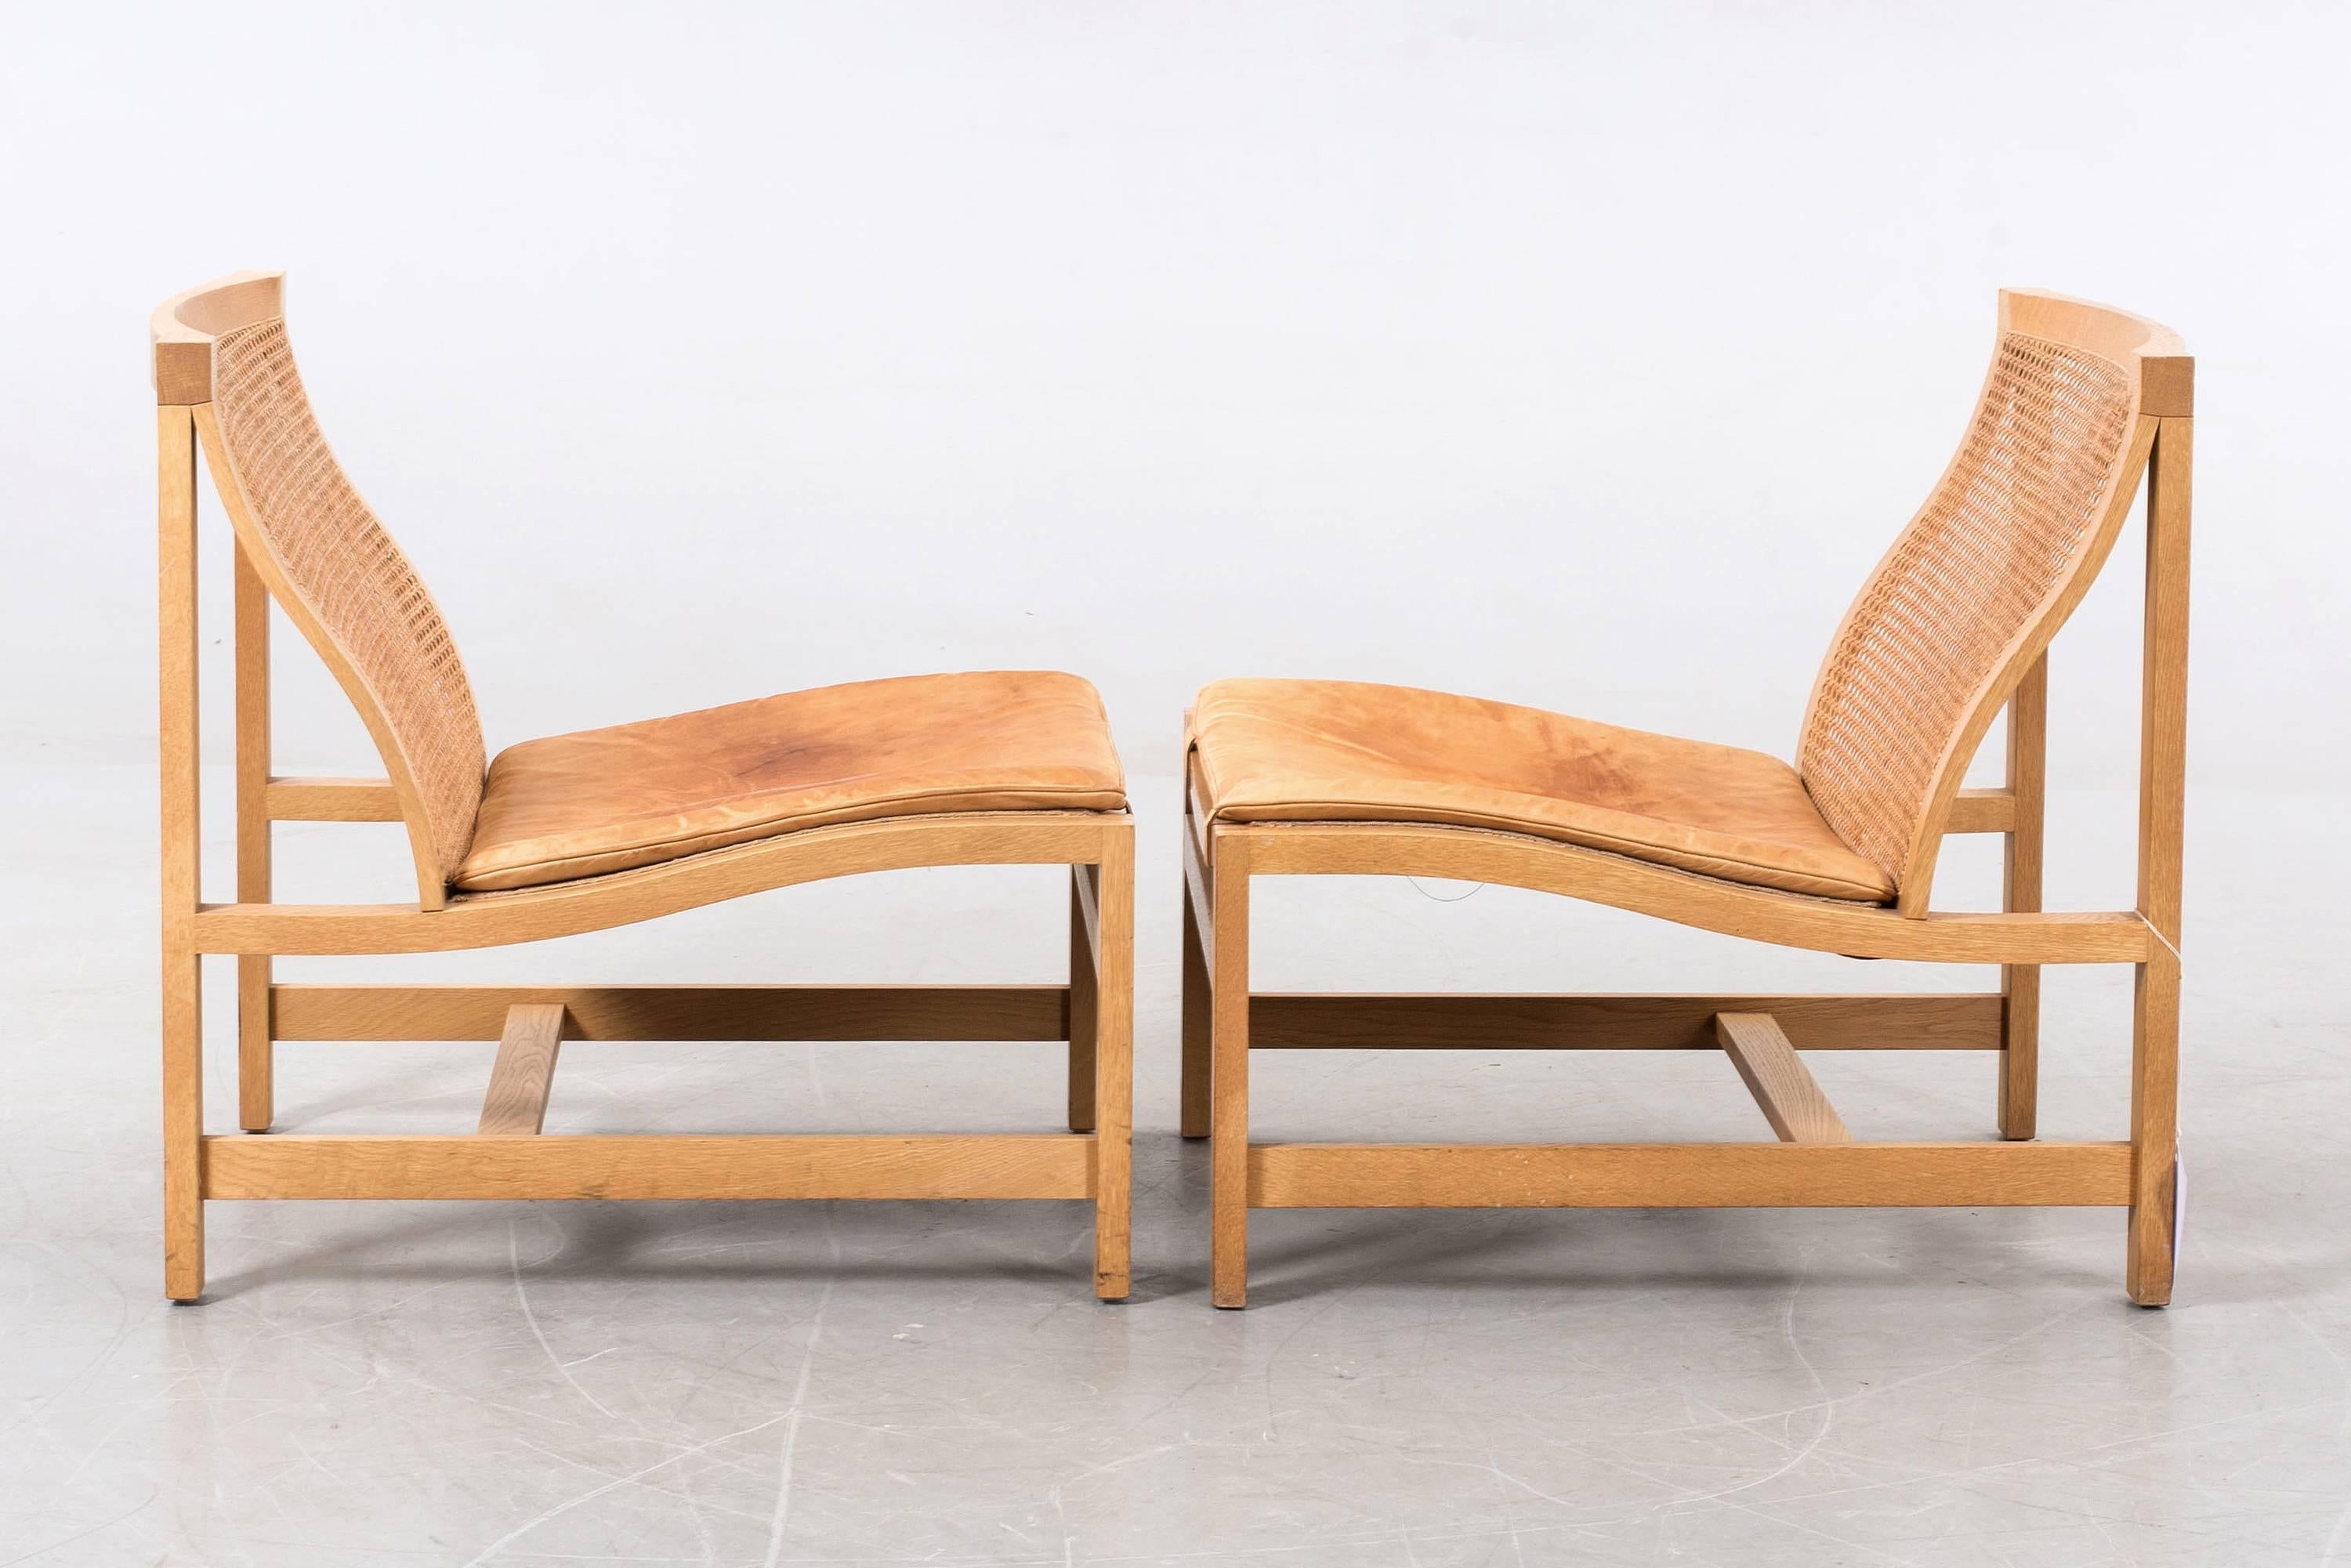 Pair of lounge chairs designed by Rud Thygesen and Johnny Sorensen.
Oak frame, rattan seat and back, cushion in light brown leather.
Thygesen & Sorensen won first prize in the 1969 competition held by the Copenhagen cabinetmakers' guild.
This